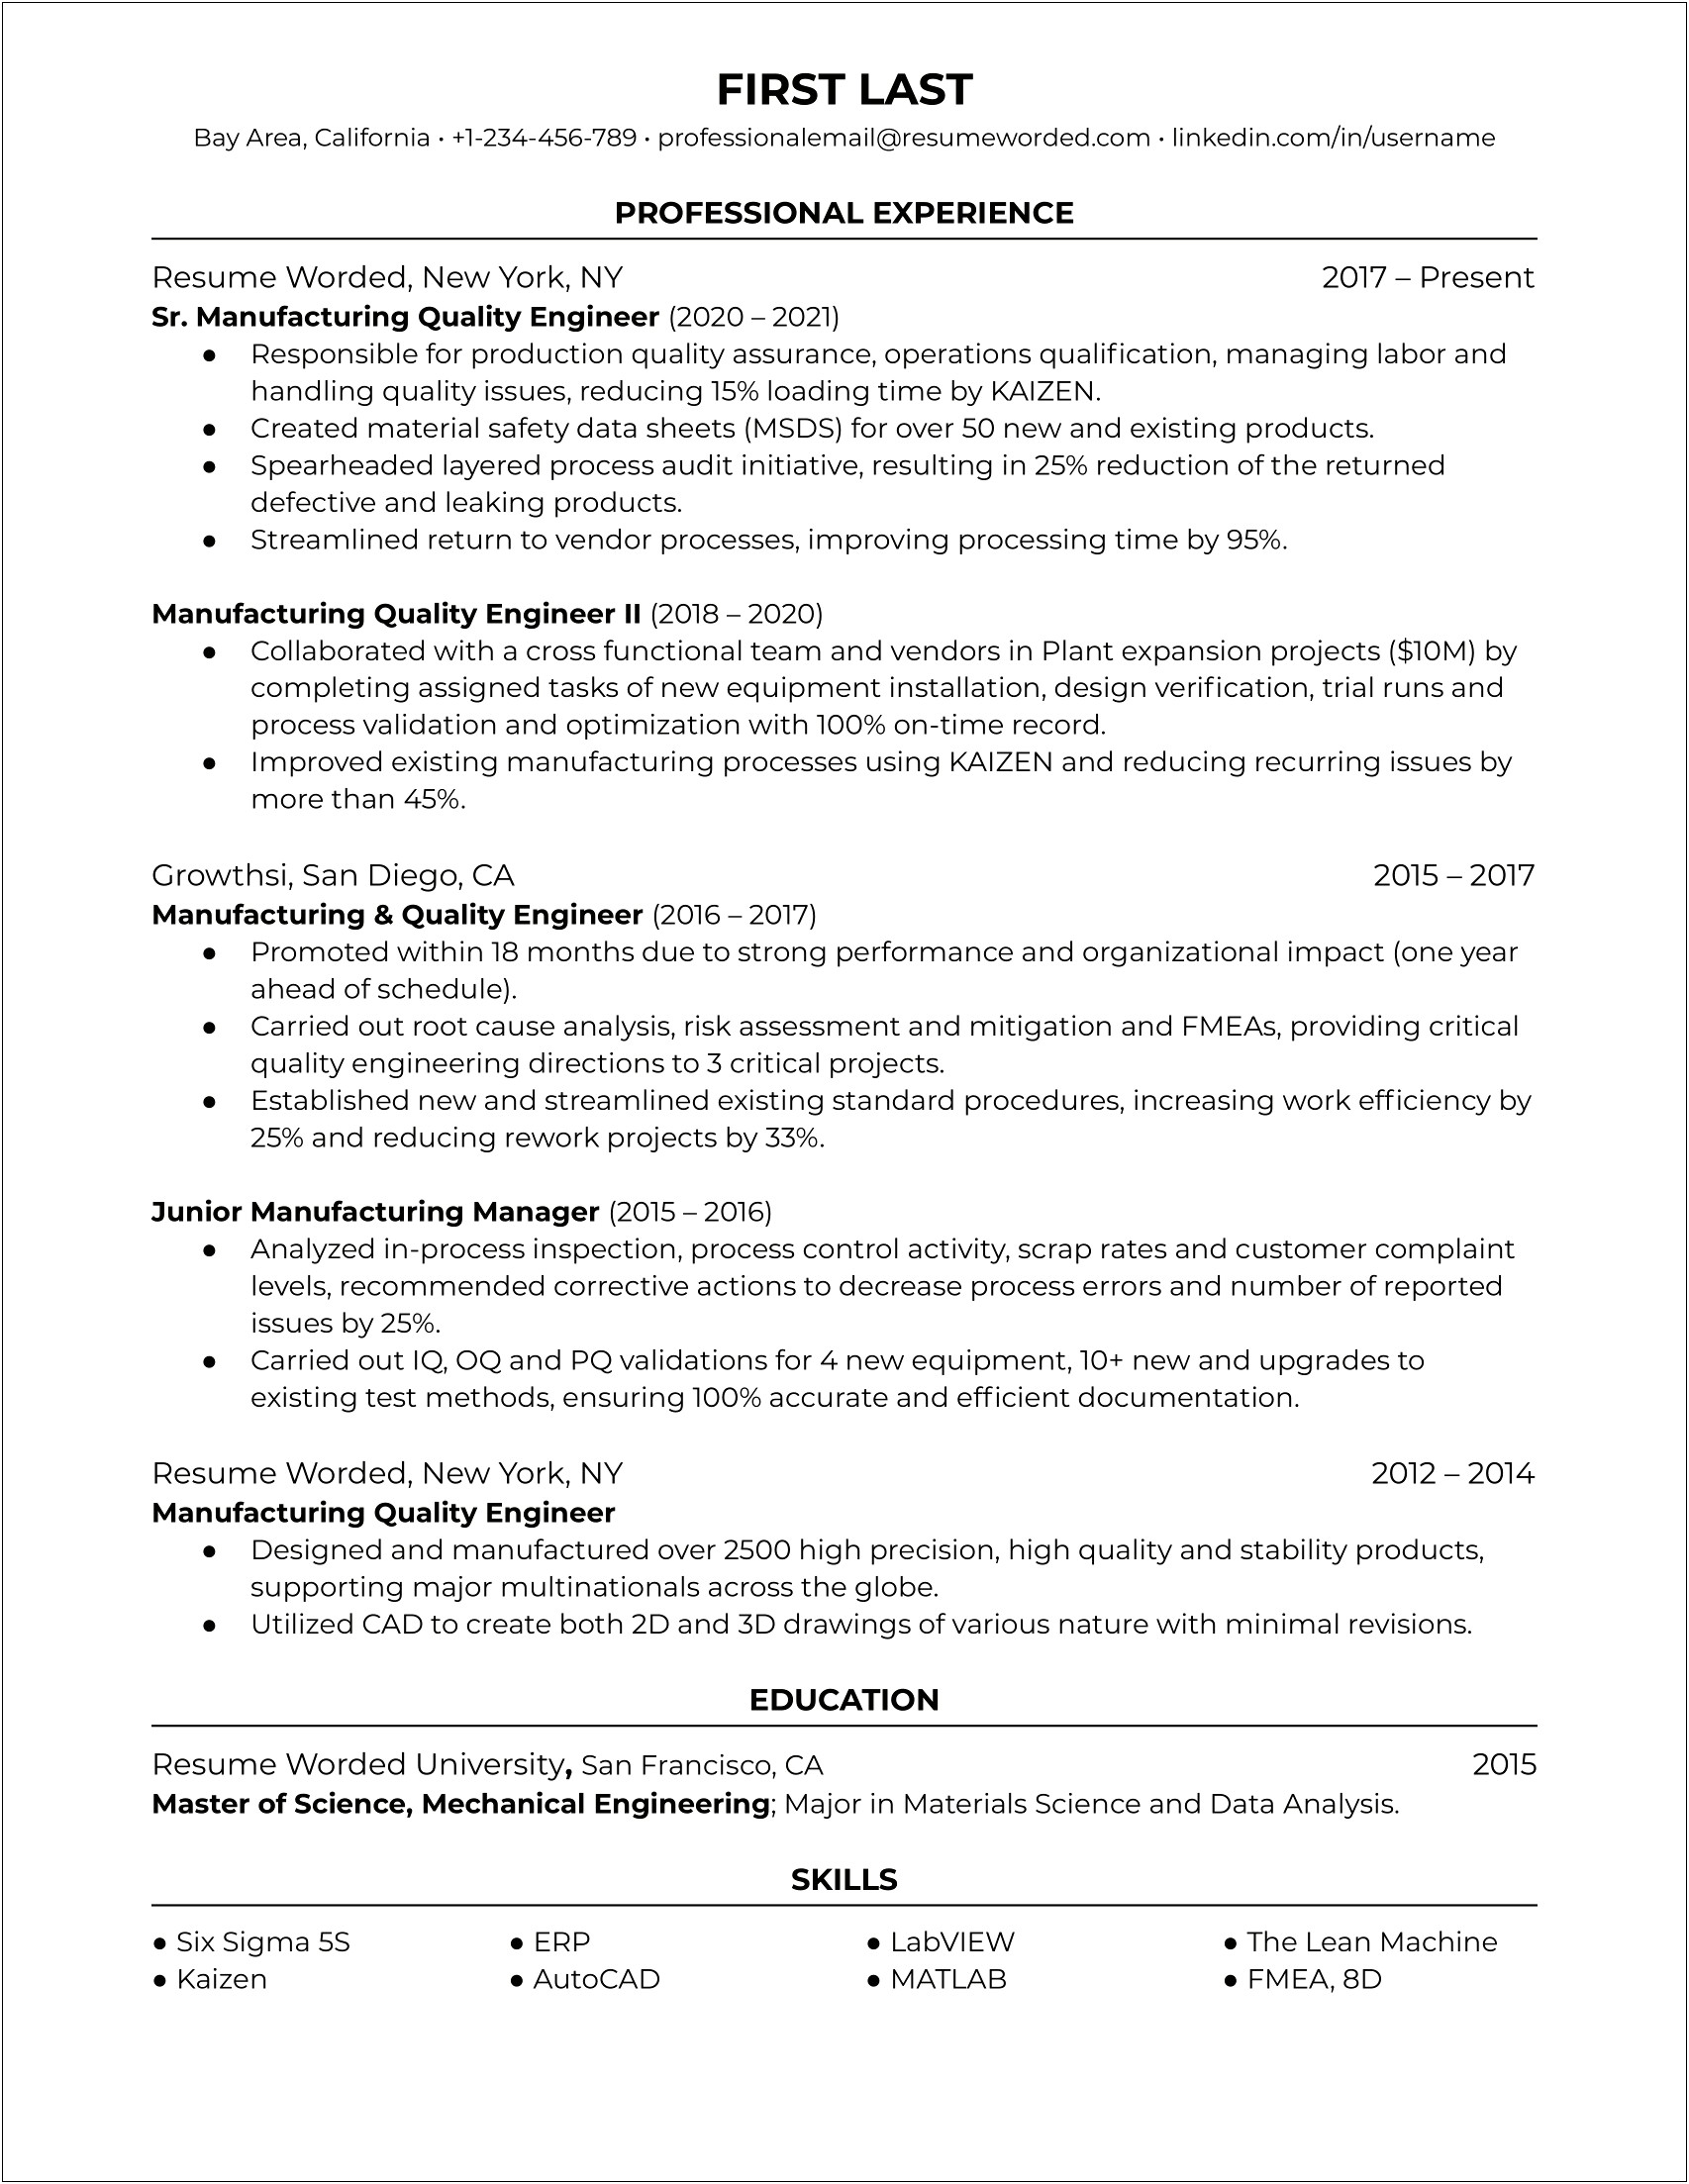 Word Format Of Entry Level Product Engineer Resume